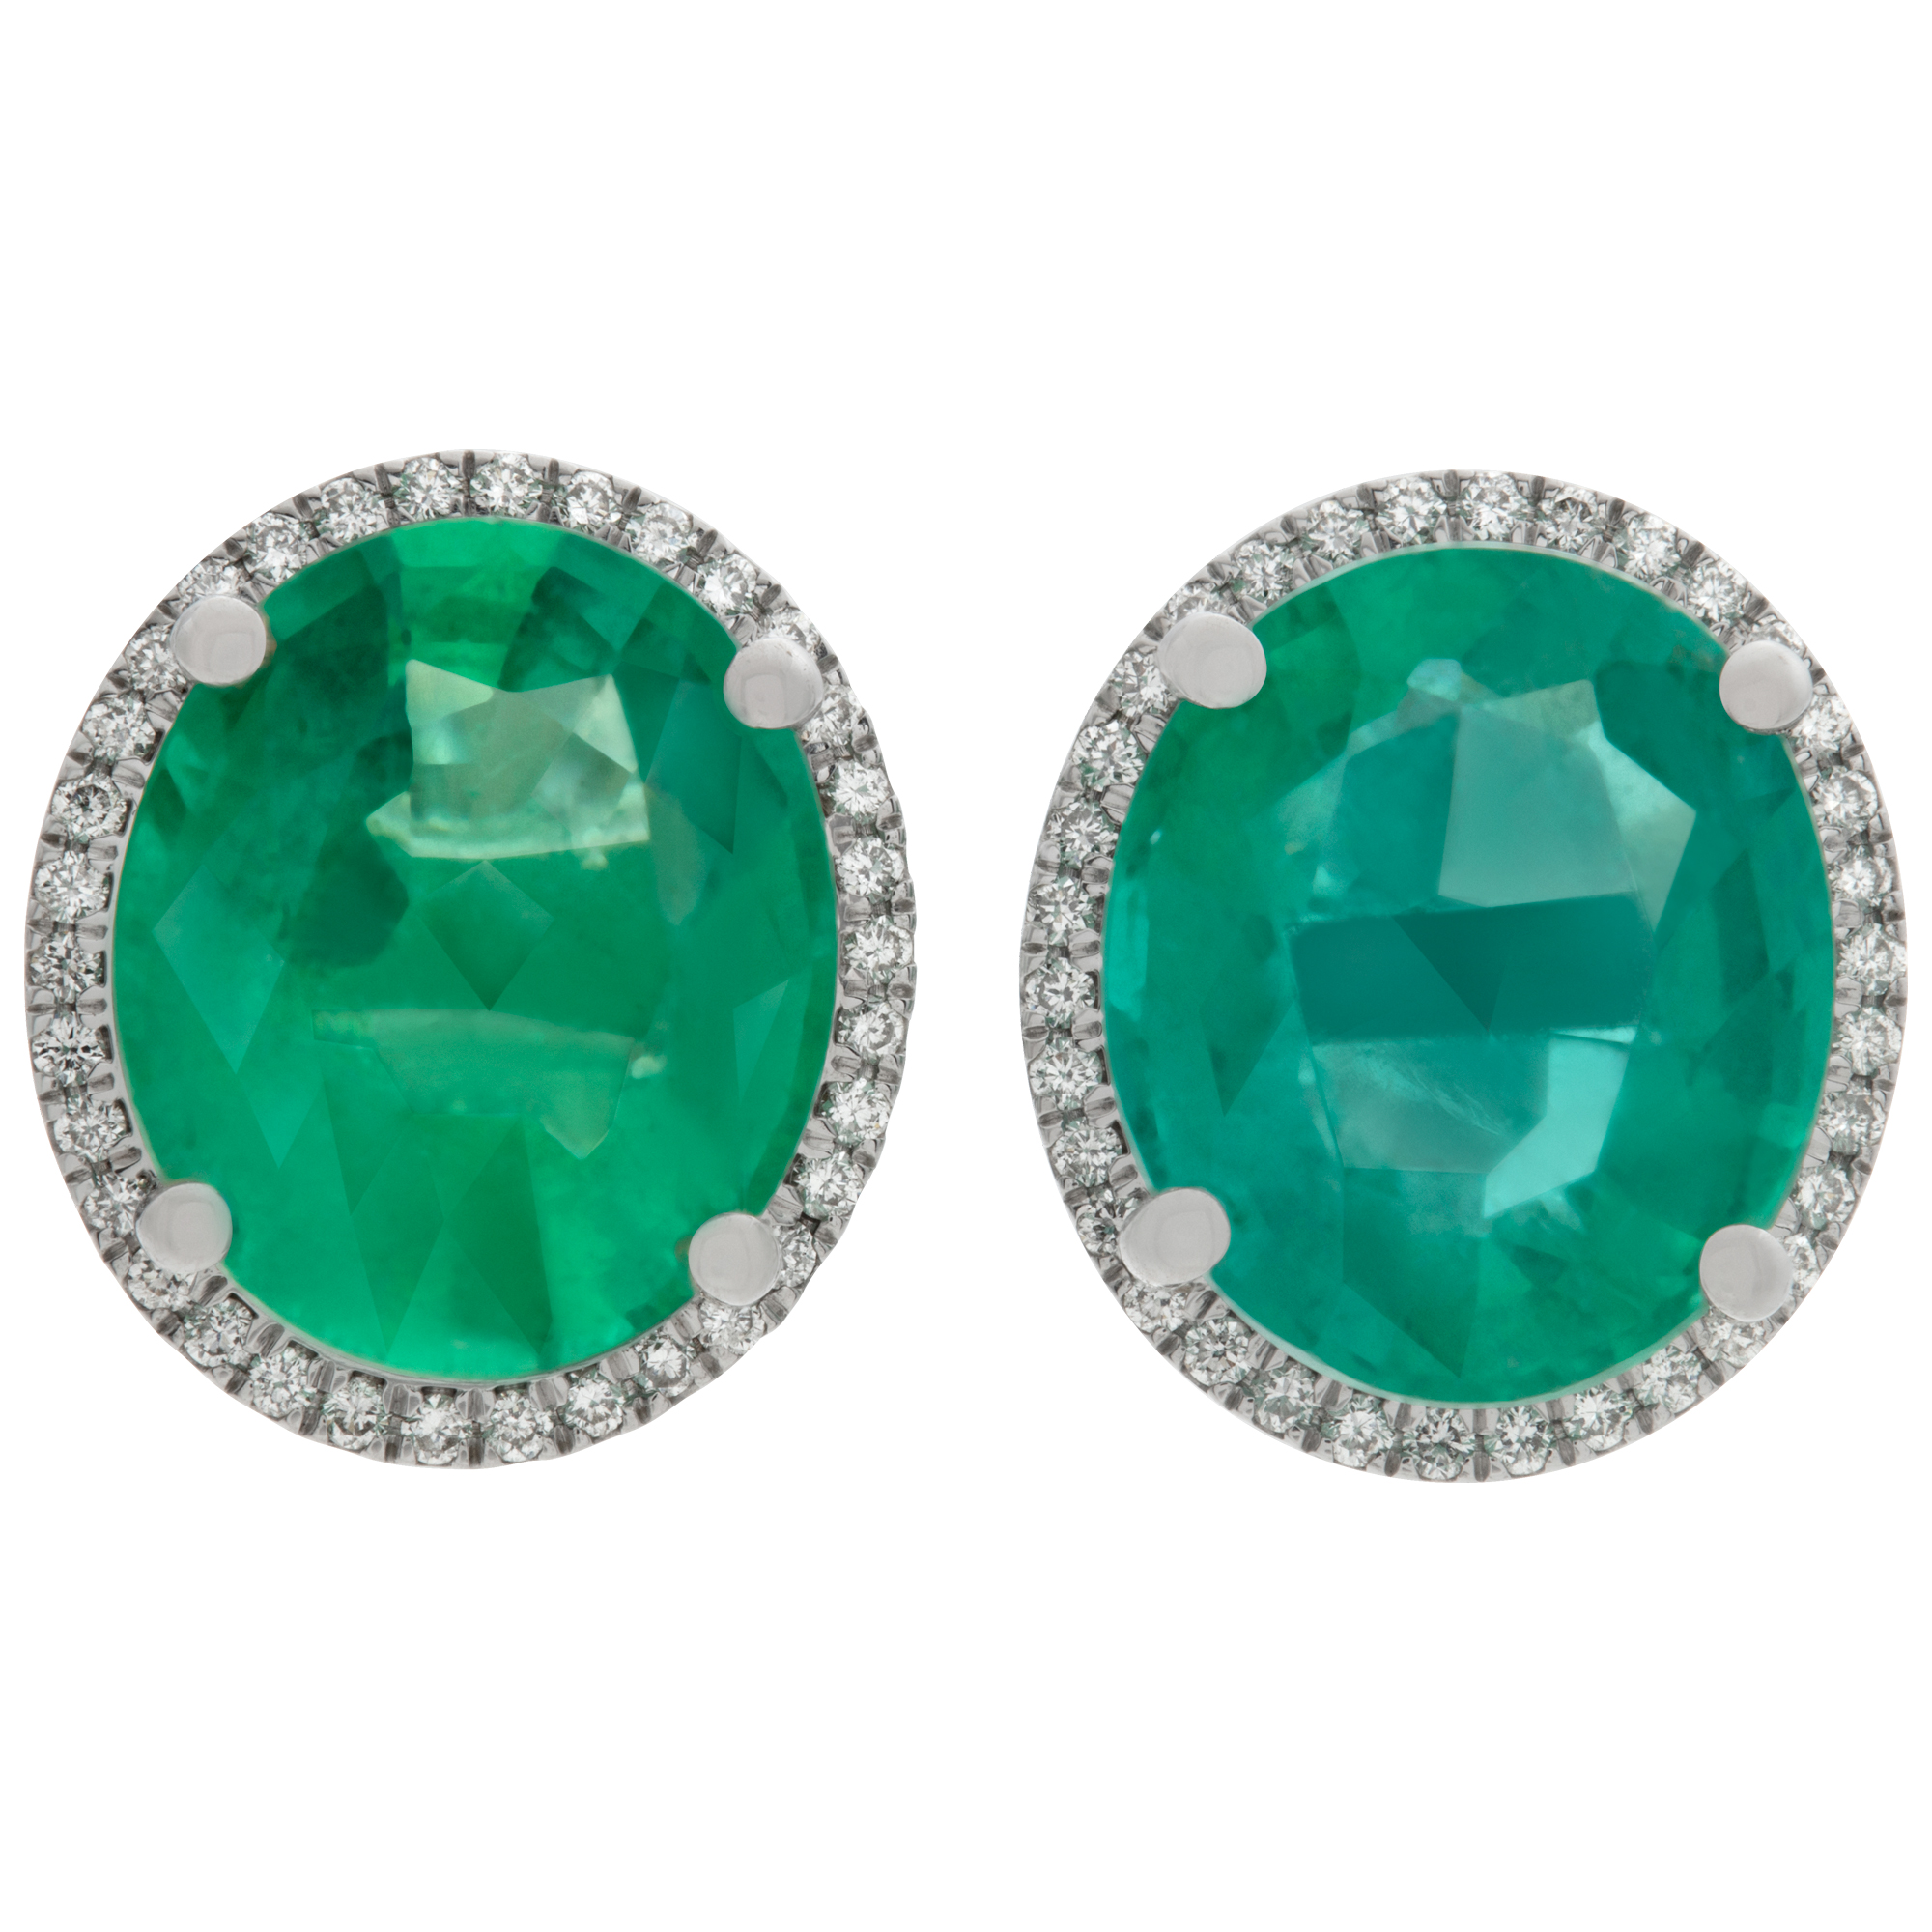 IDT certified Emeralds and diamonds stud earrings in 18k white gold. Oval brilliant cut emerald total approx. weight: 6.83 carats. image 1